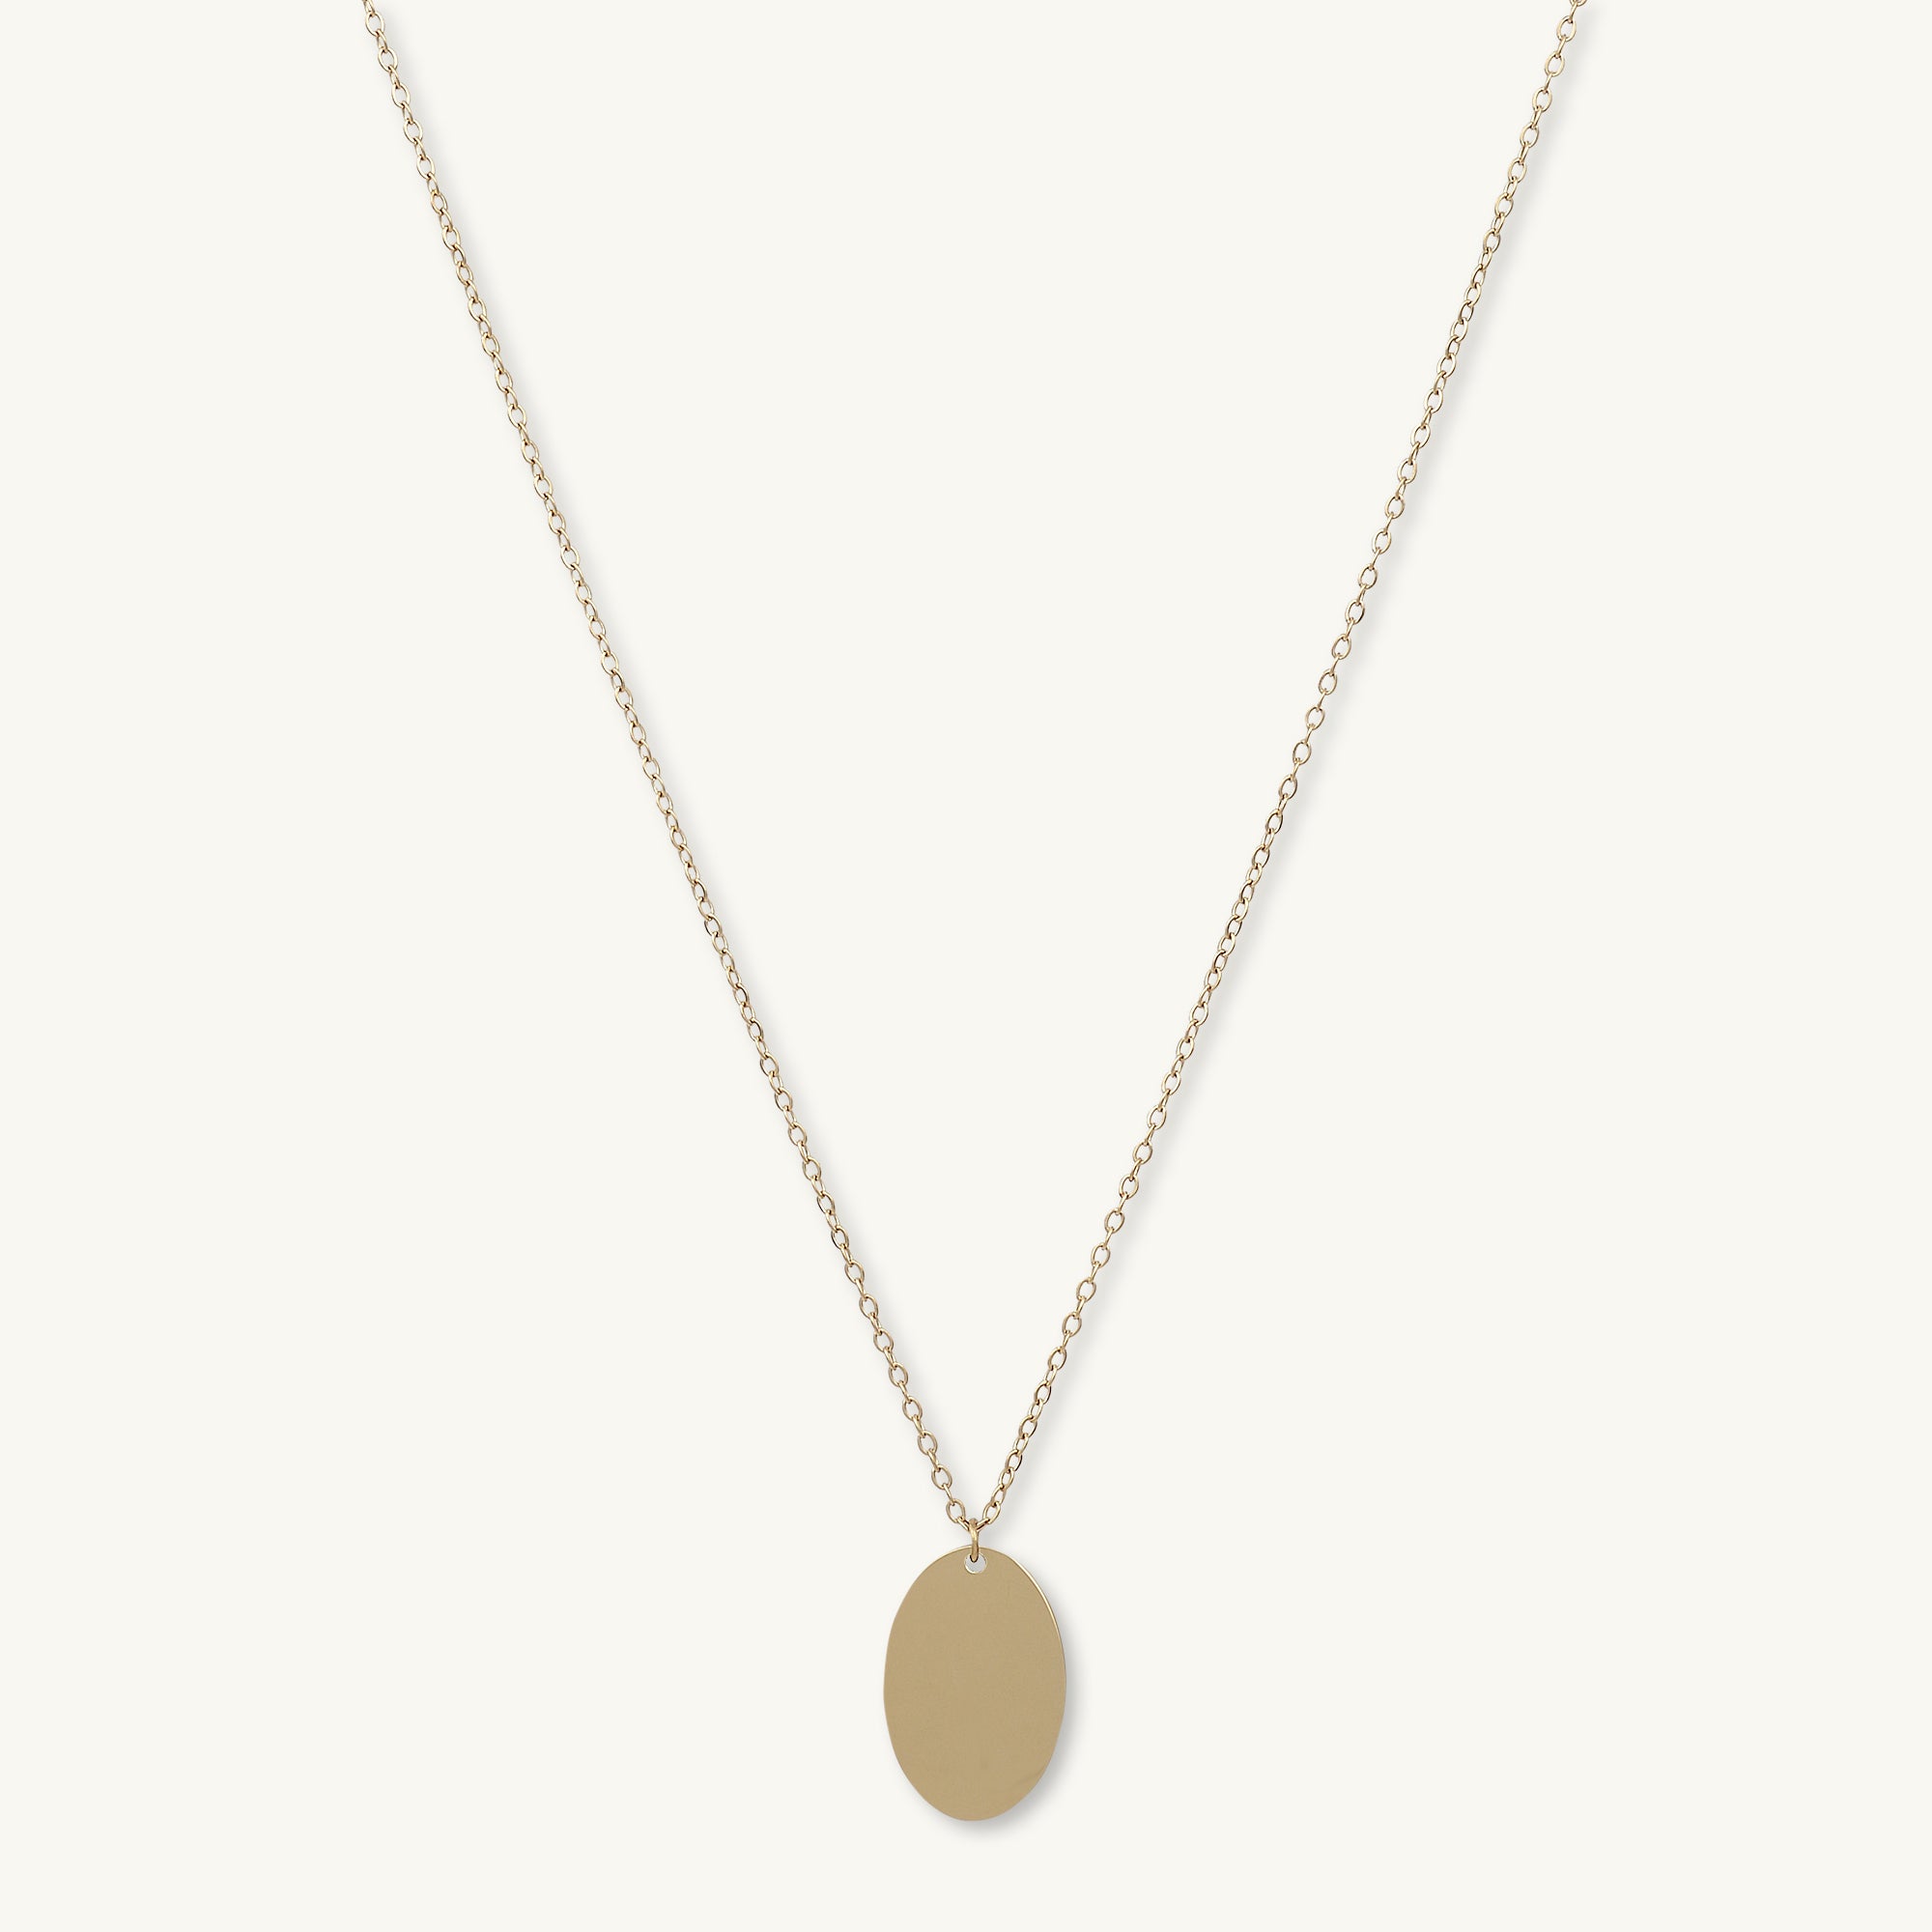 Oval Engraved Personalised Necklace